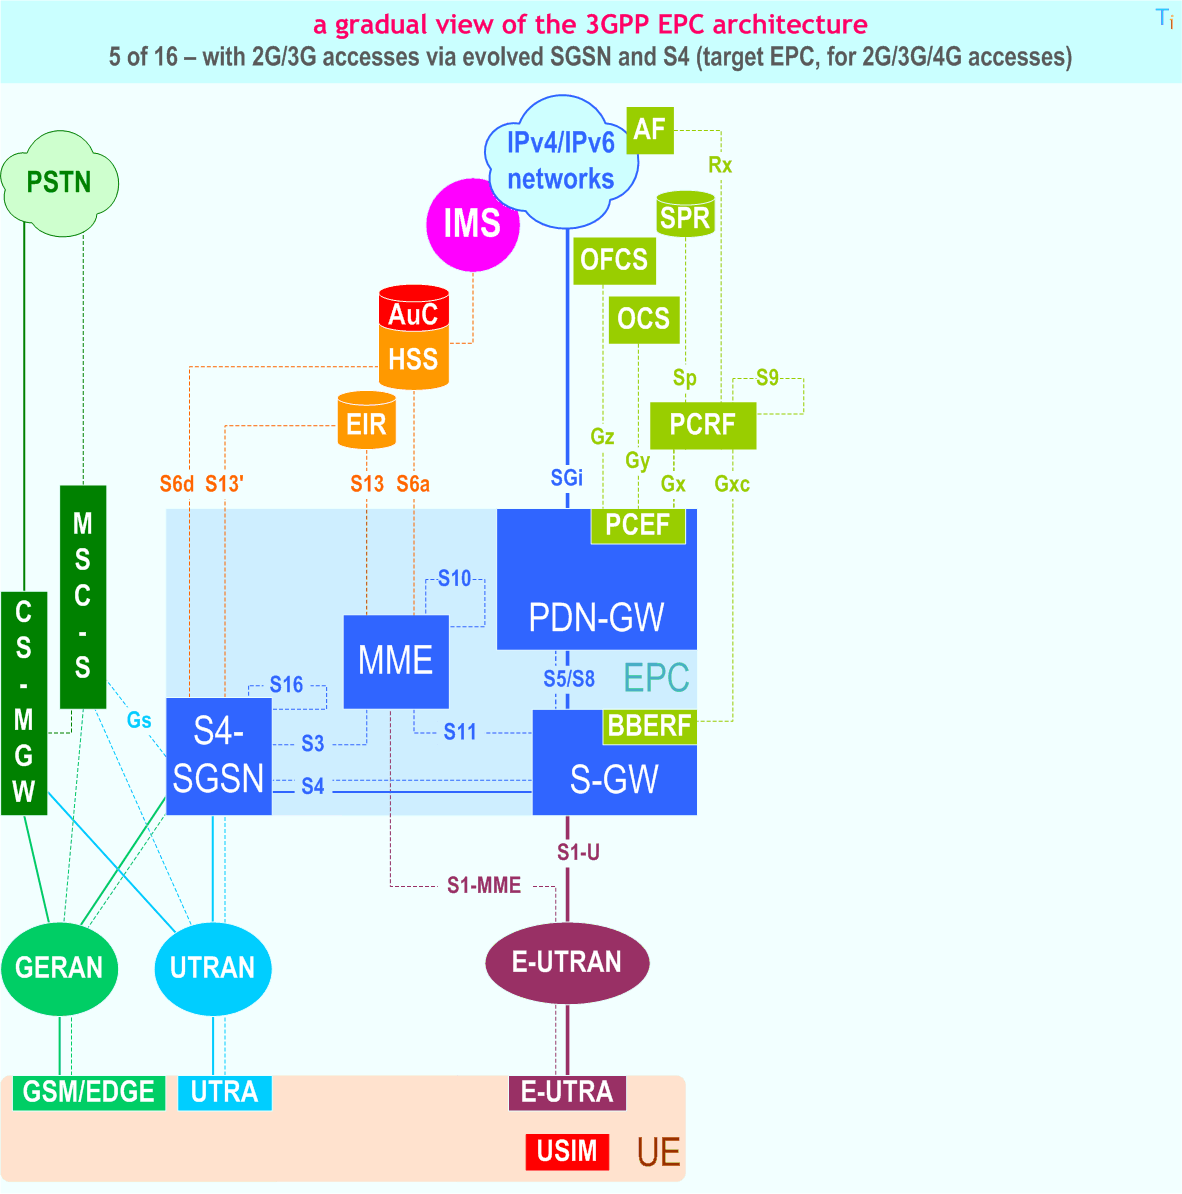 Gradual view of the 3GPP EPC (Evolved Packet Core) architecture - 5 of 16 - EPC for 2G/3G accesses via SGSN-S4